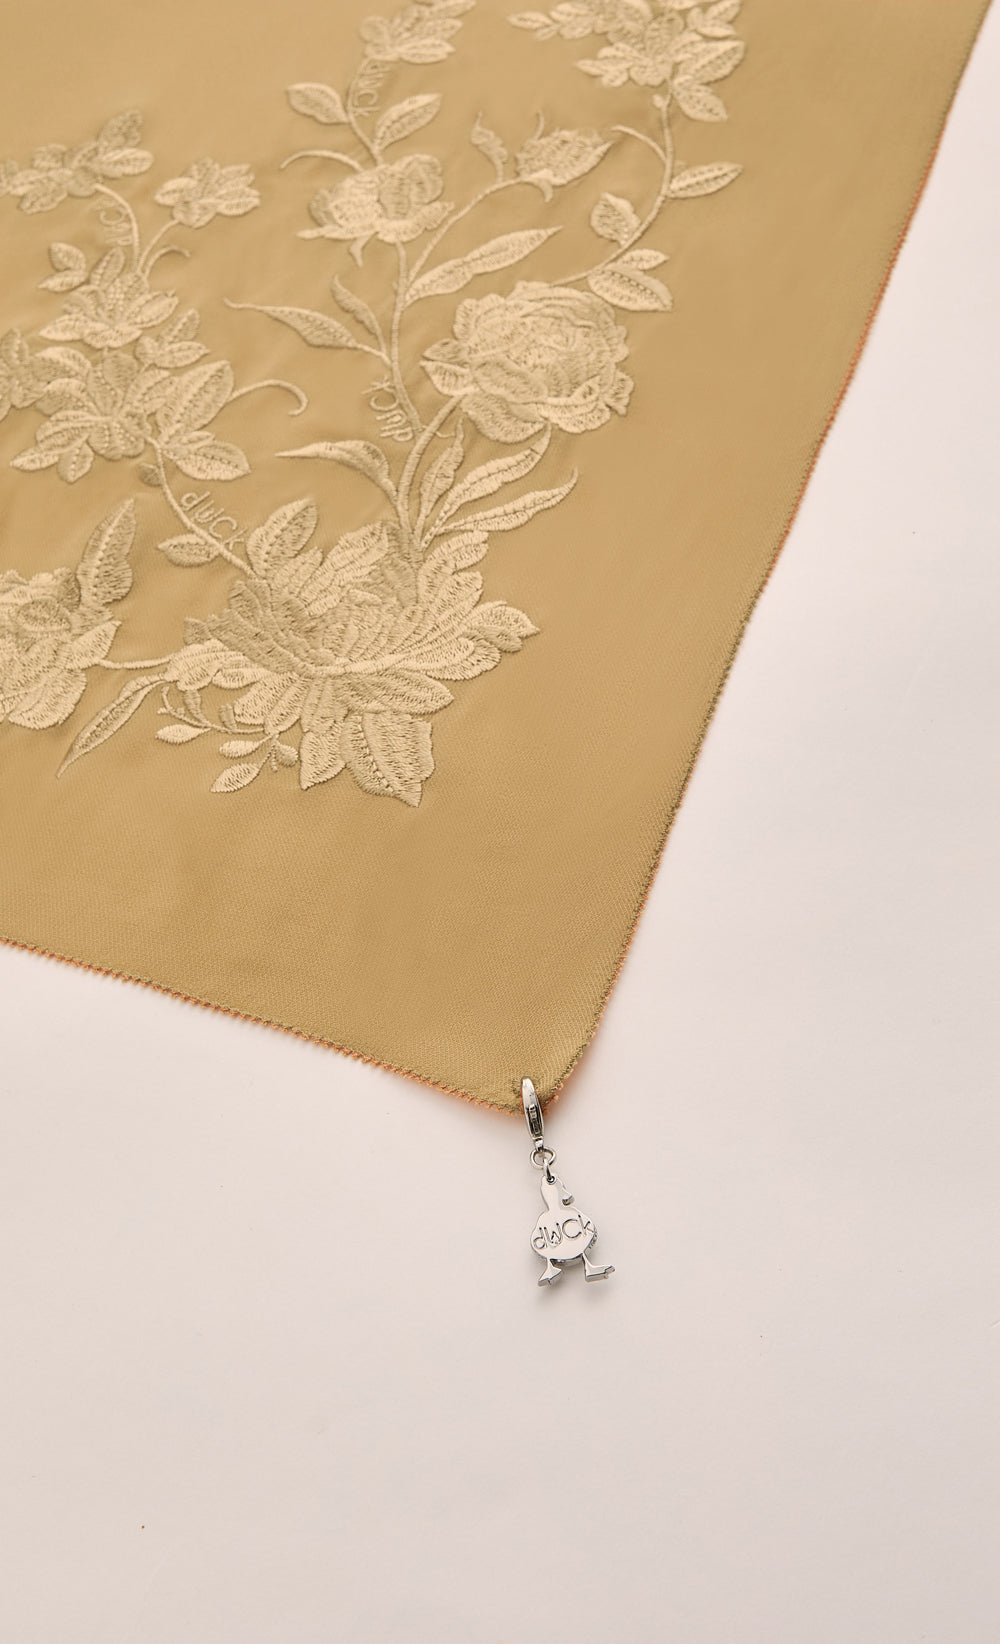 The Peonies Embroidery dUCk Shawl in Sand